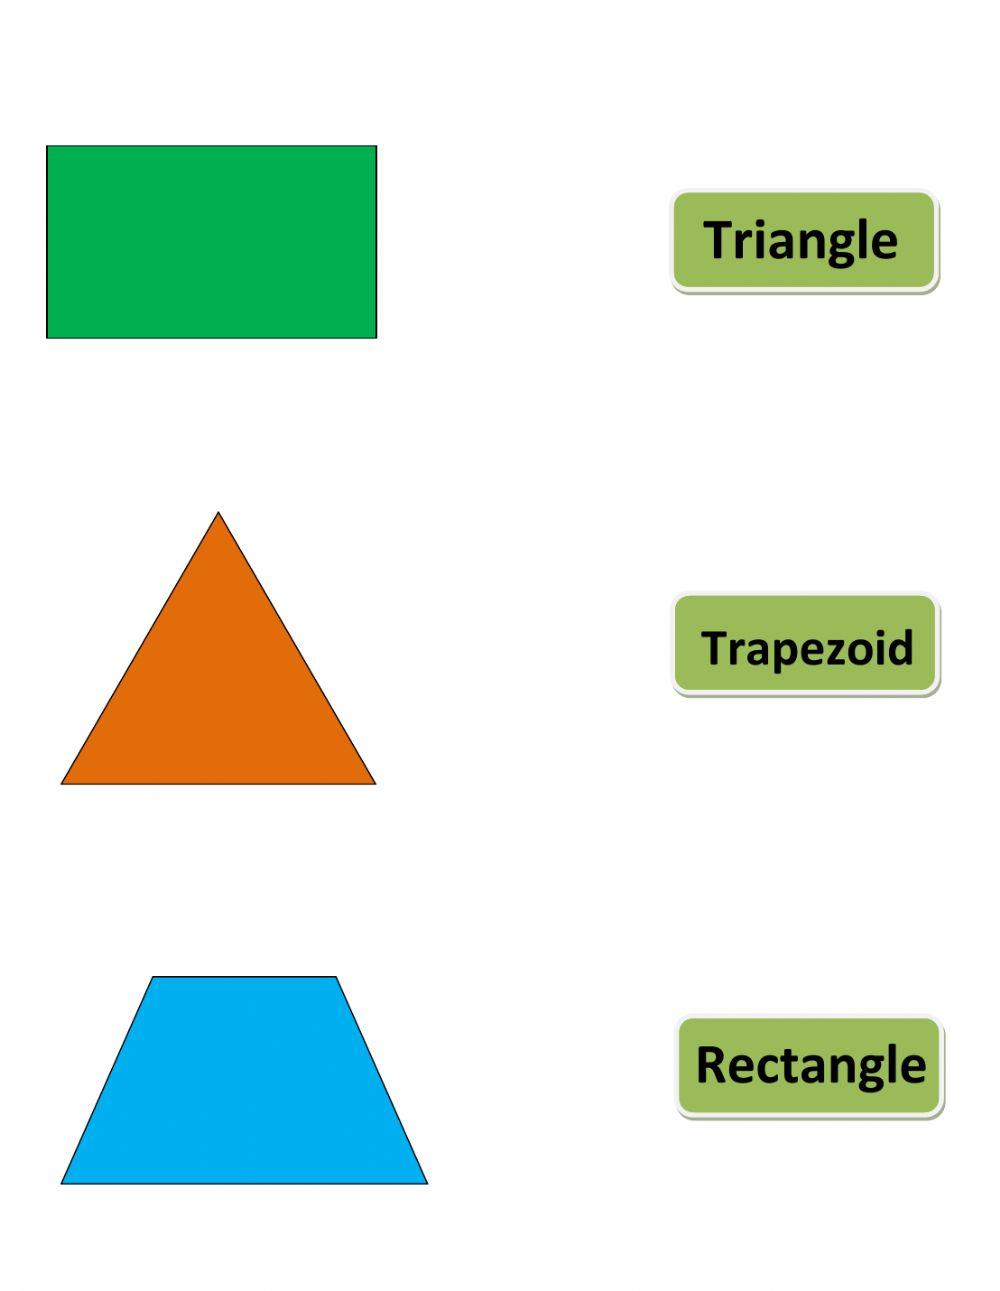 Matching 2-Dimensional Shapes to Names